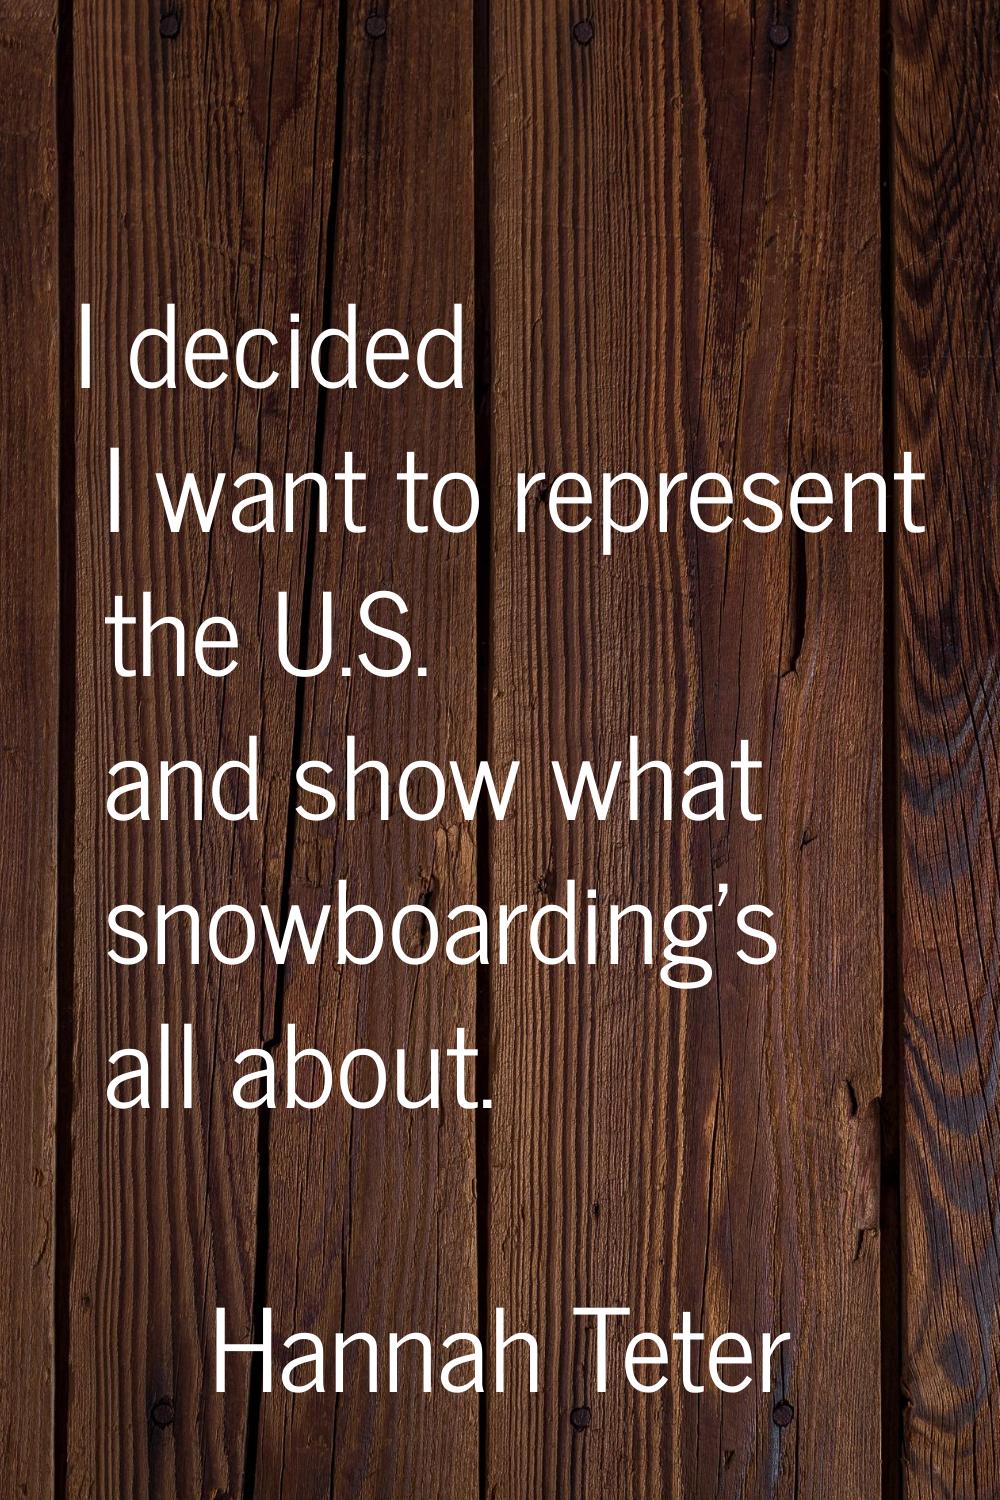 I decided I want to represent the U.S. and show what snowboarding's all about.